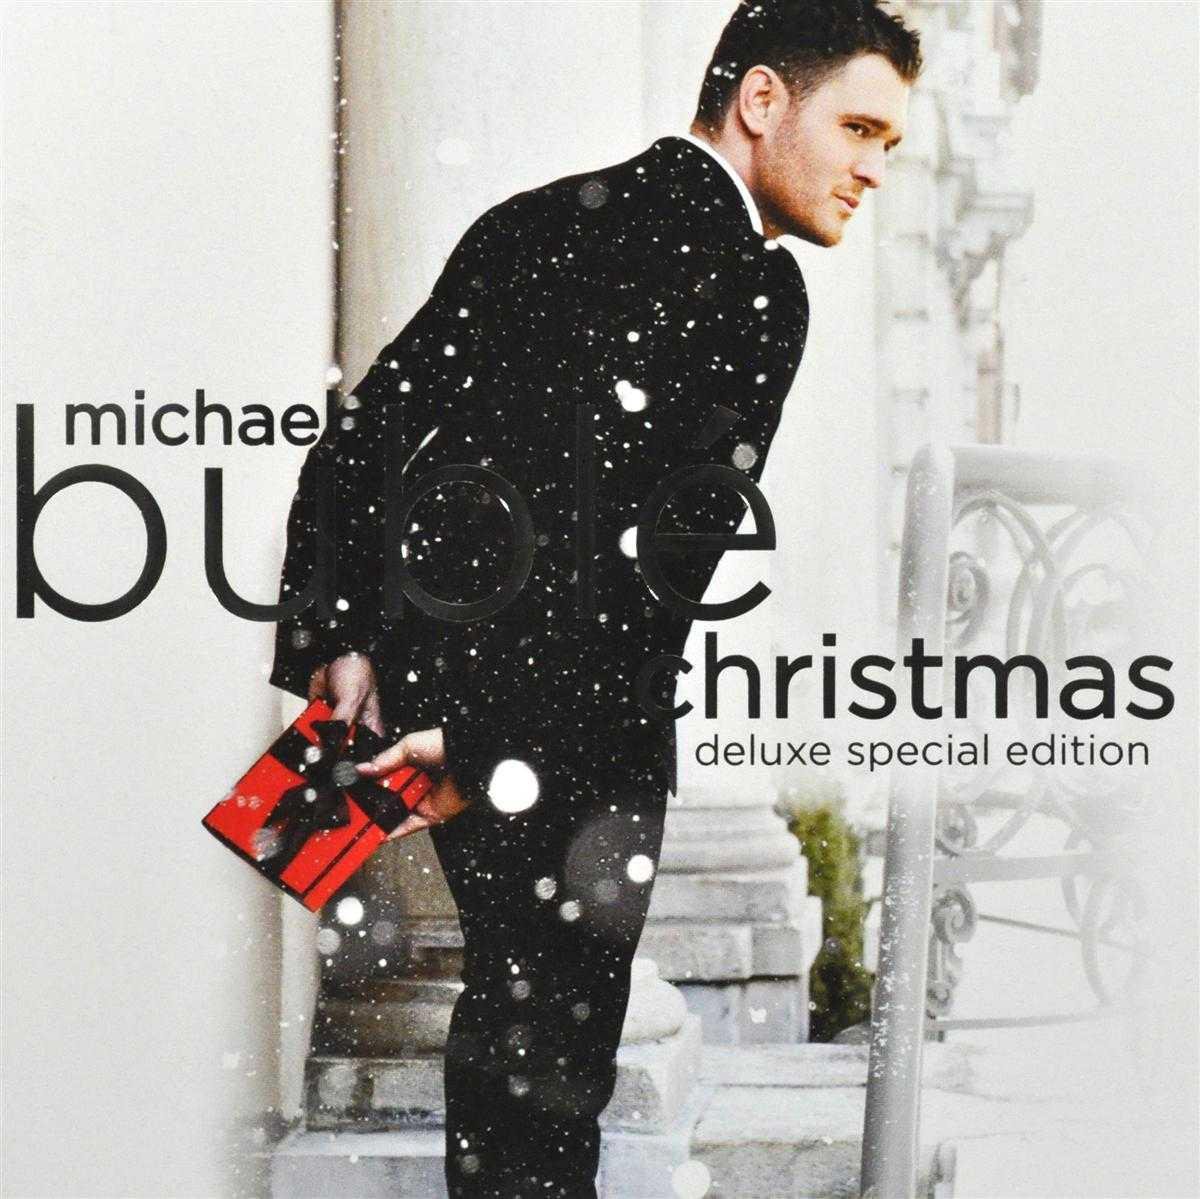 Christmas (Deluxe Special Edition) (CD) - Buble,michael